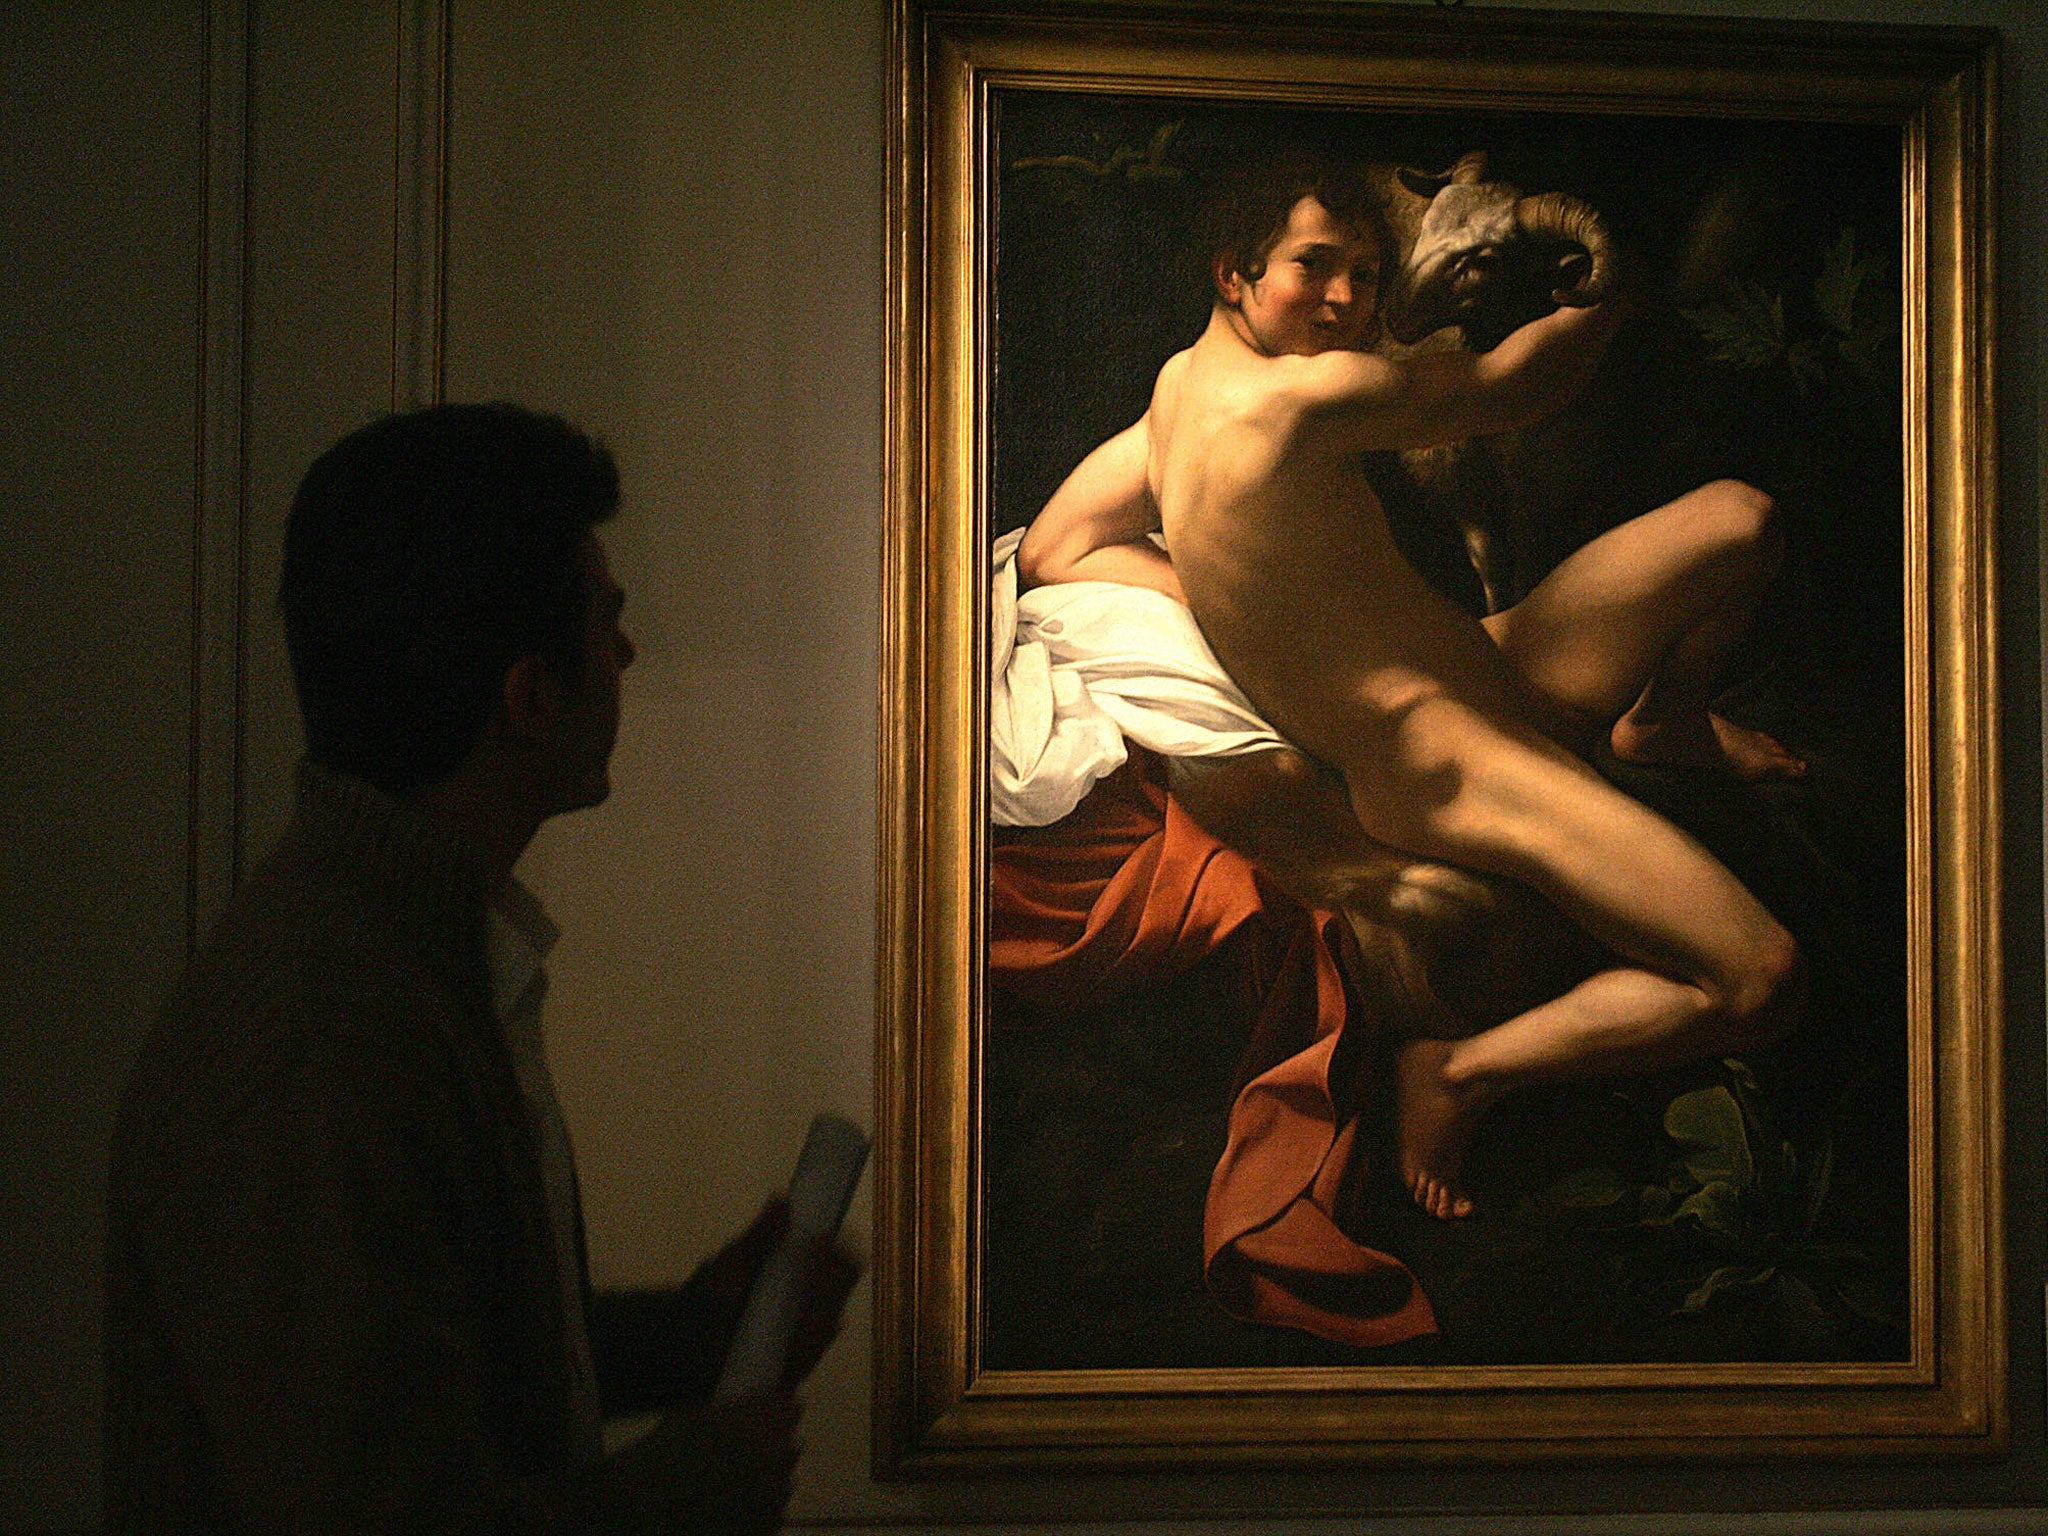 A visitor looks at 'Saint John the Baptist', a 17th century painting originally attributed to Michelangelo Merisi da Caravaggio, on display at Athens' Museum of Cycladic Art 27 April 2006.